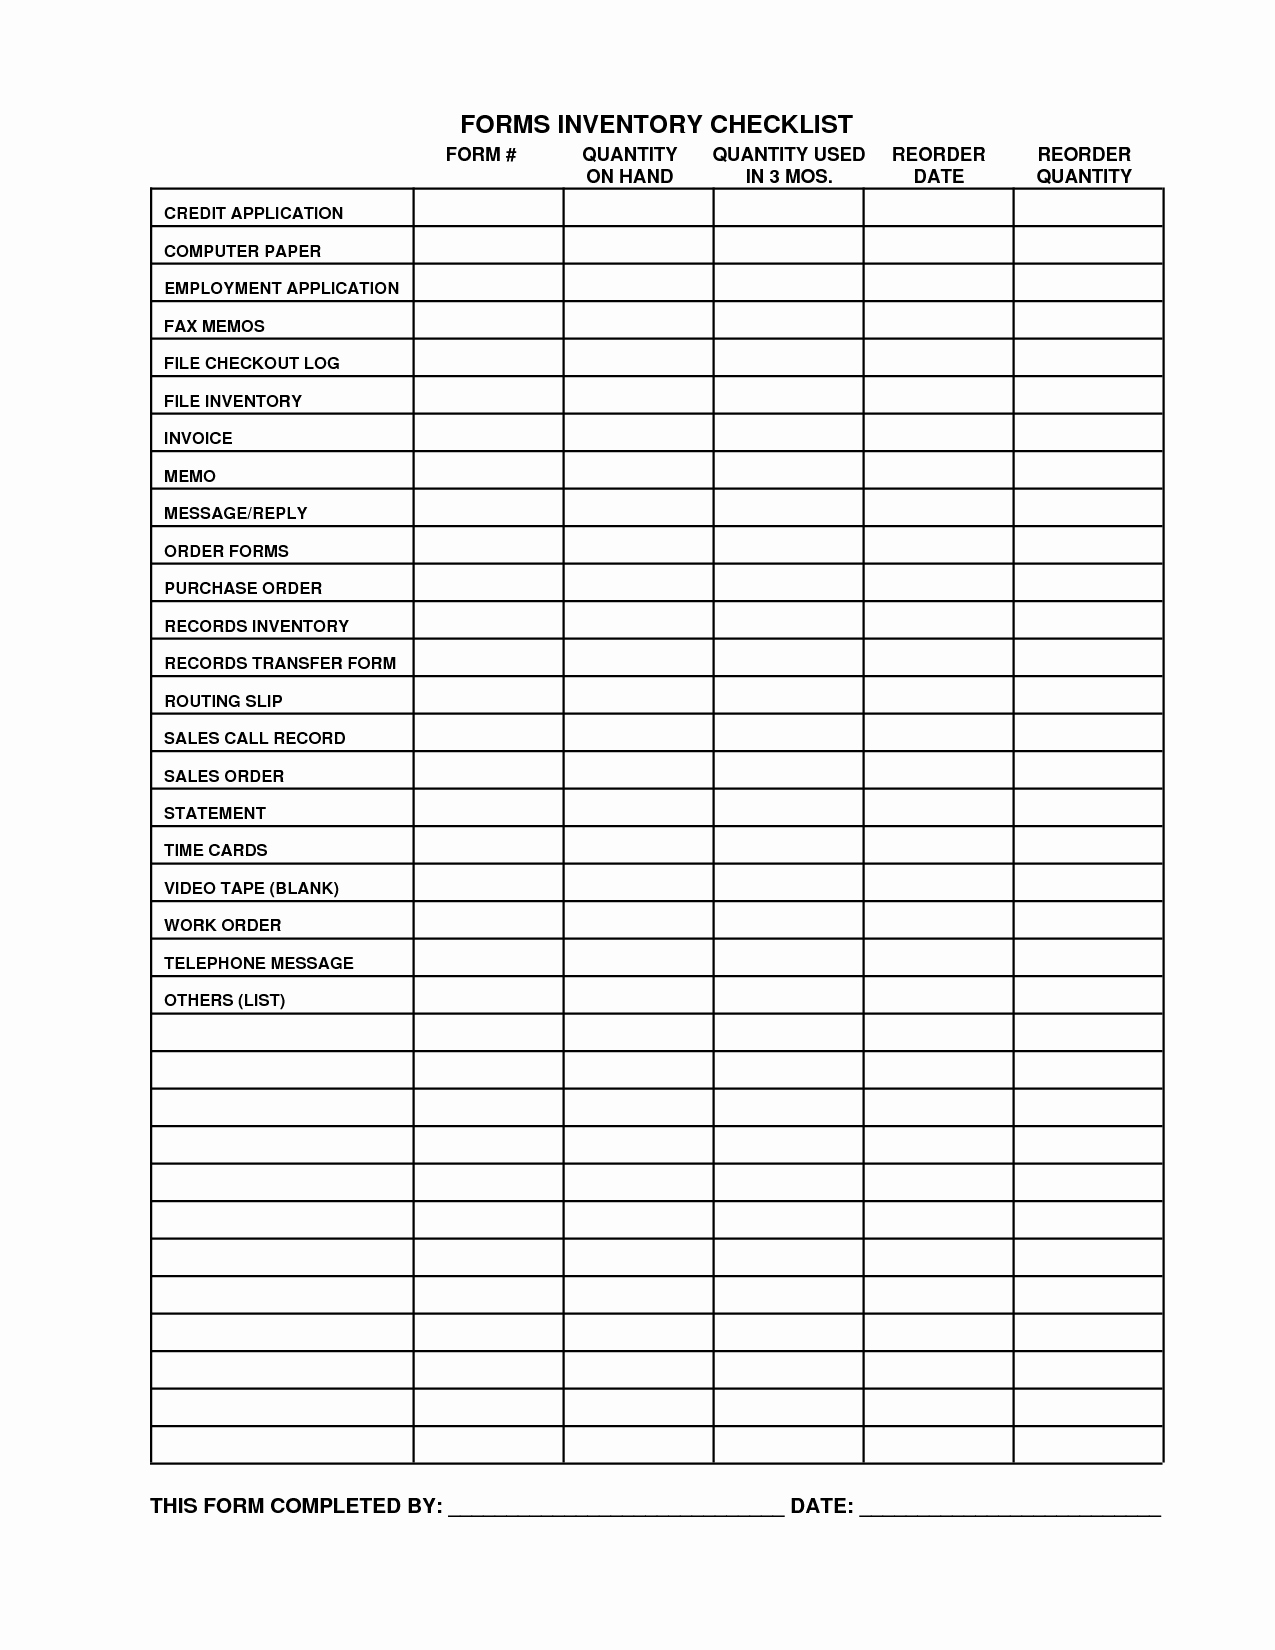 Check Out Sheet Template Best Of Inventory Check Out Sheet Template Templates Station